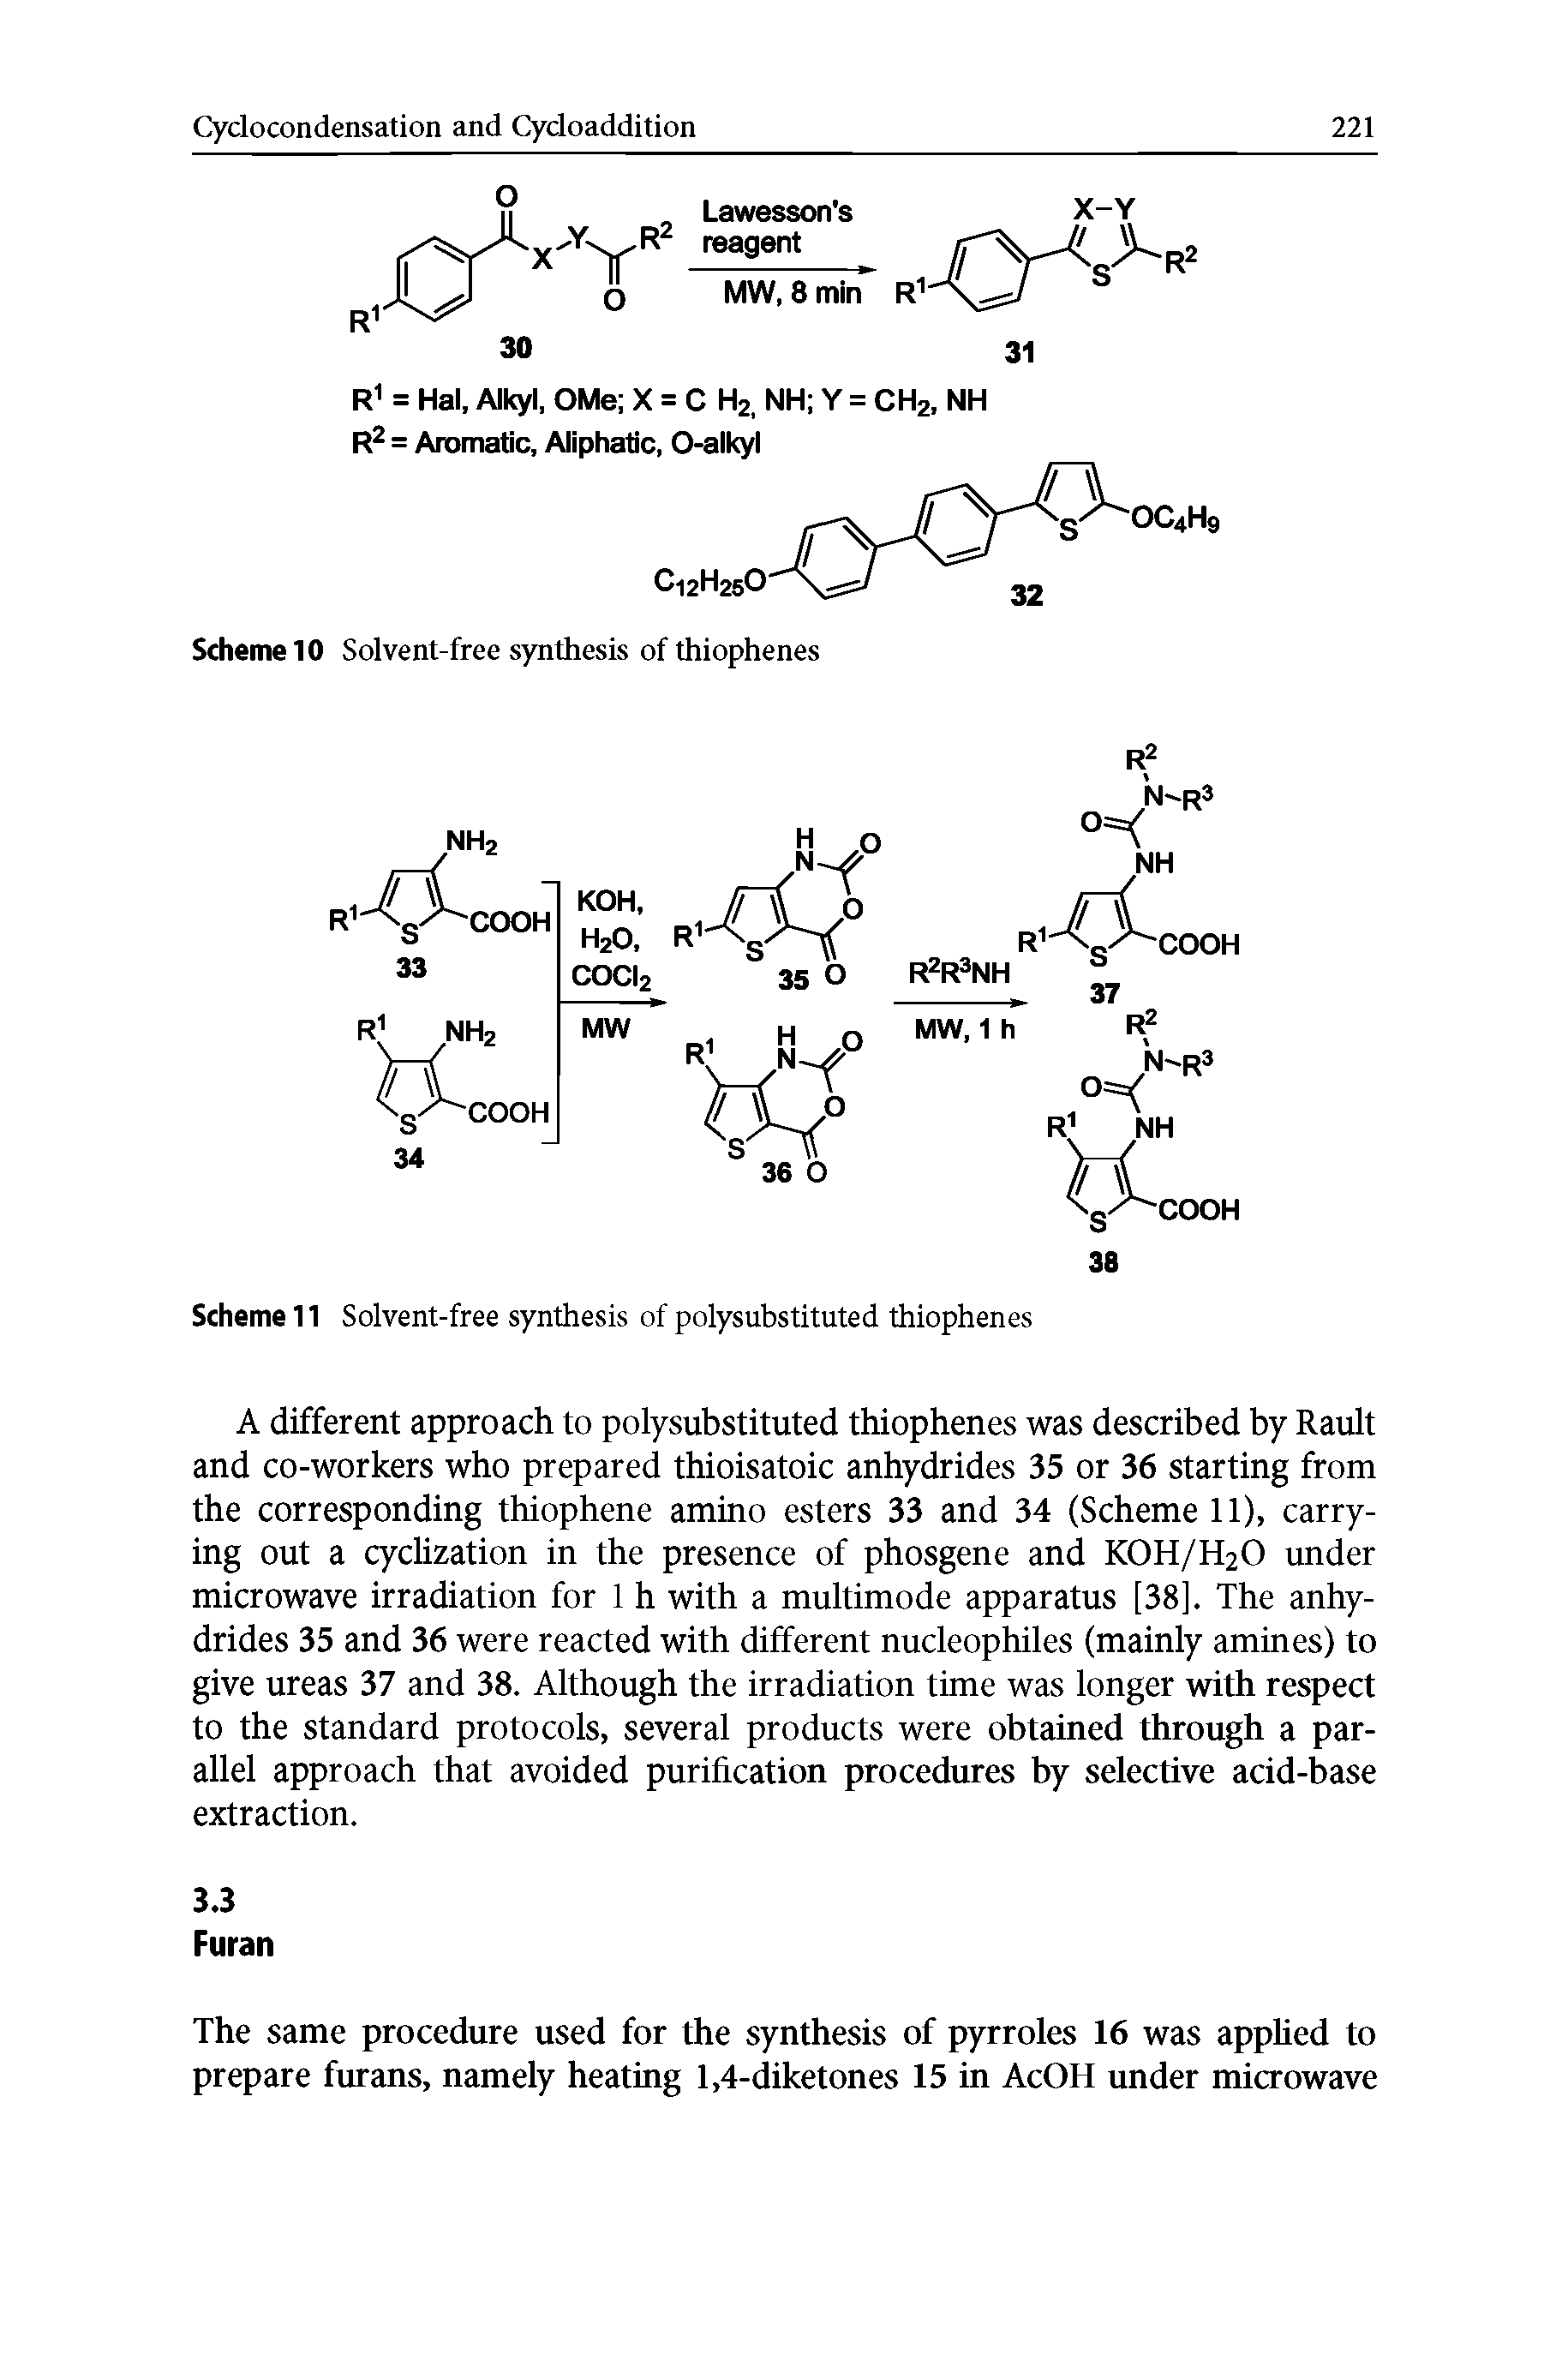 Scheme 11 Solvent-free synthesis of polysubstituted thiophenes...